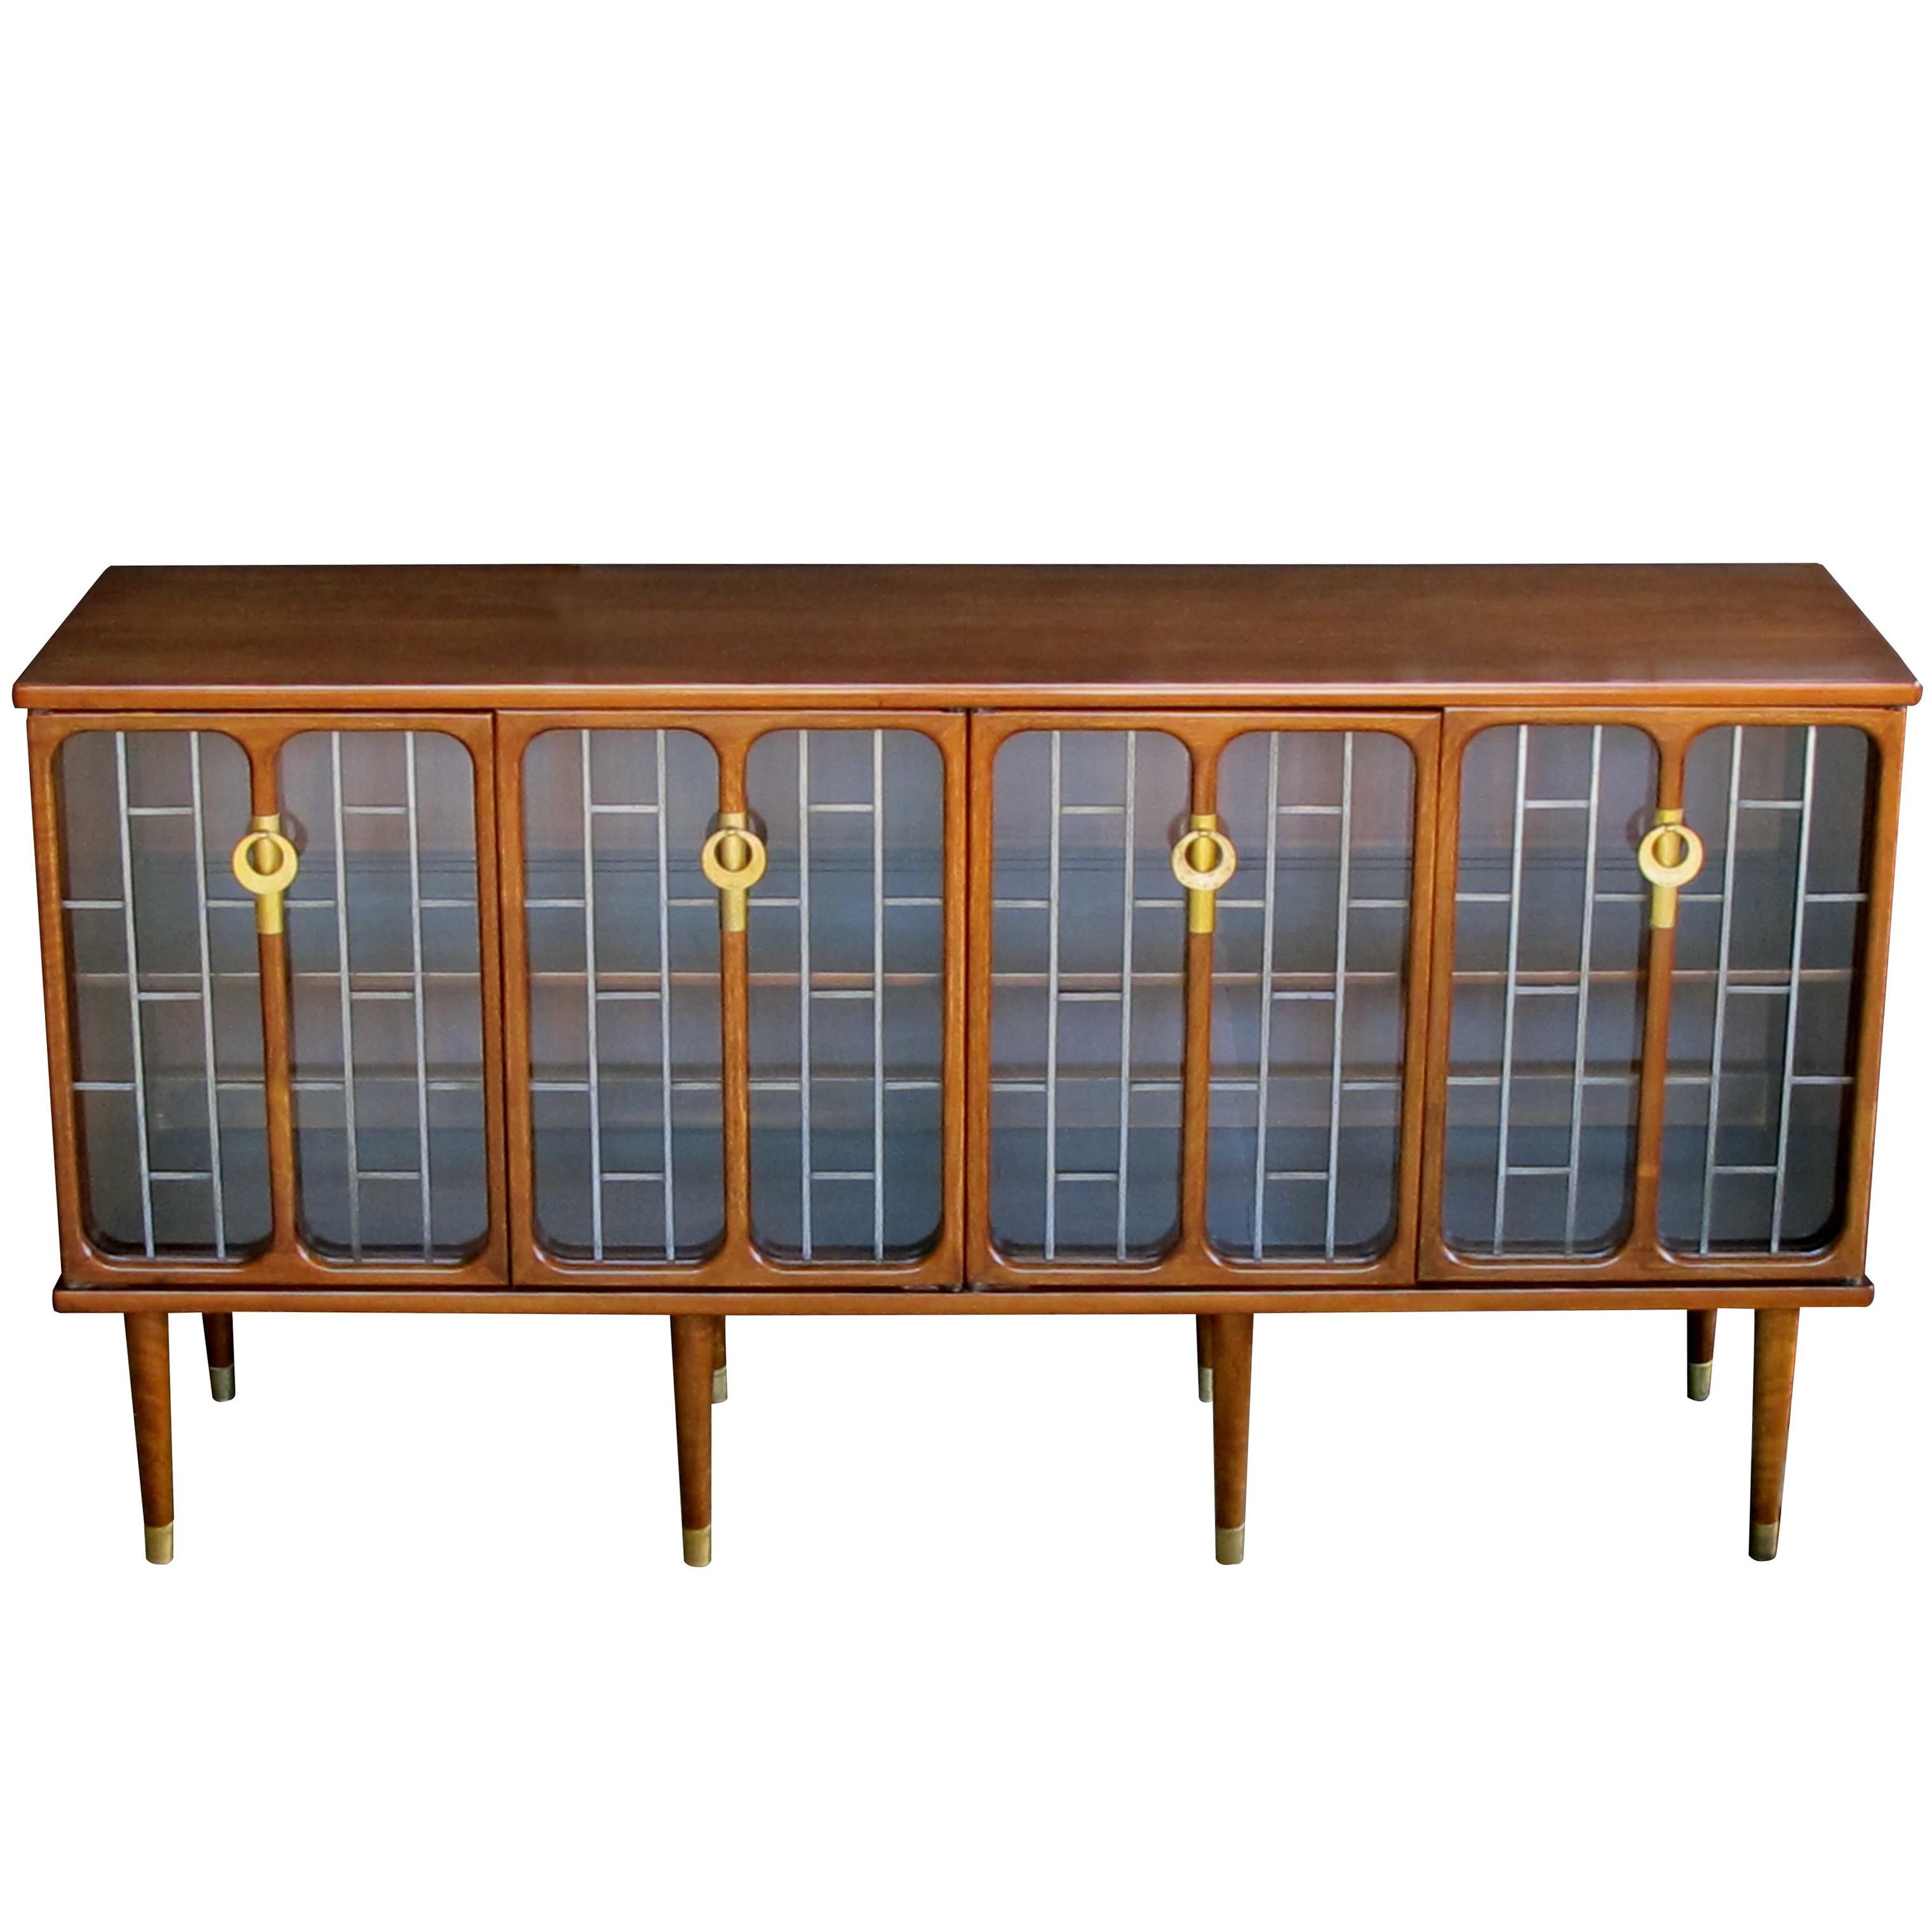 Sophisticated American Mid-Century Modern Walnut Four-Door Credenza or Sideboard